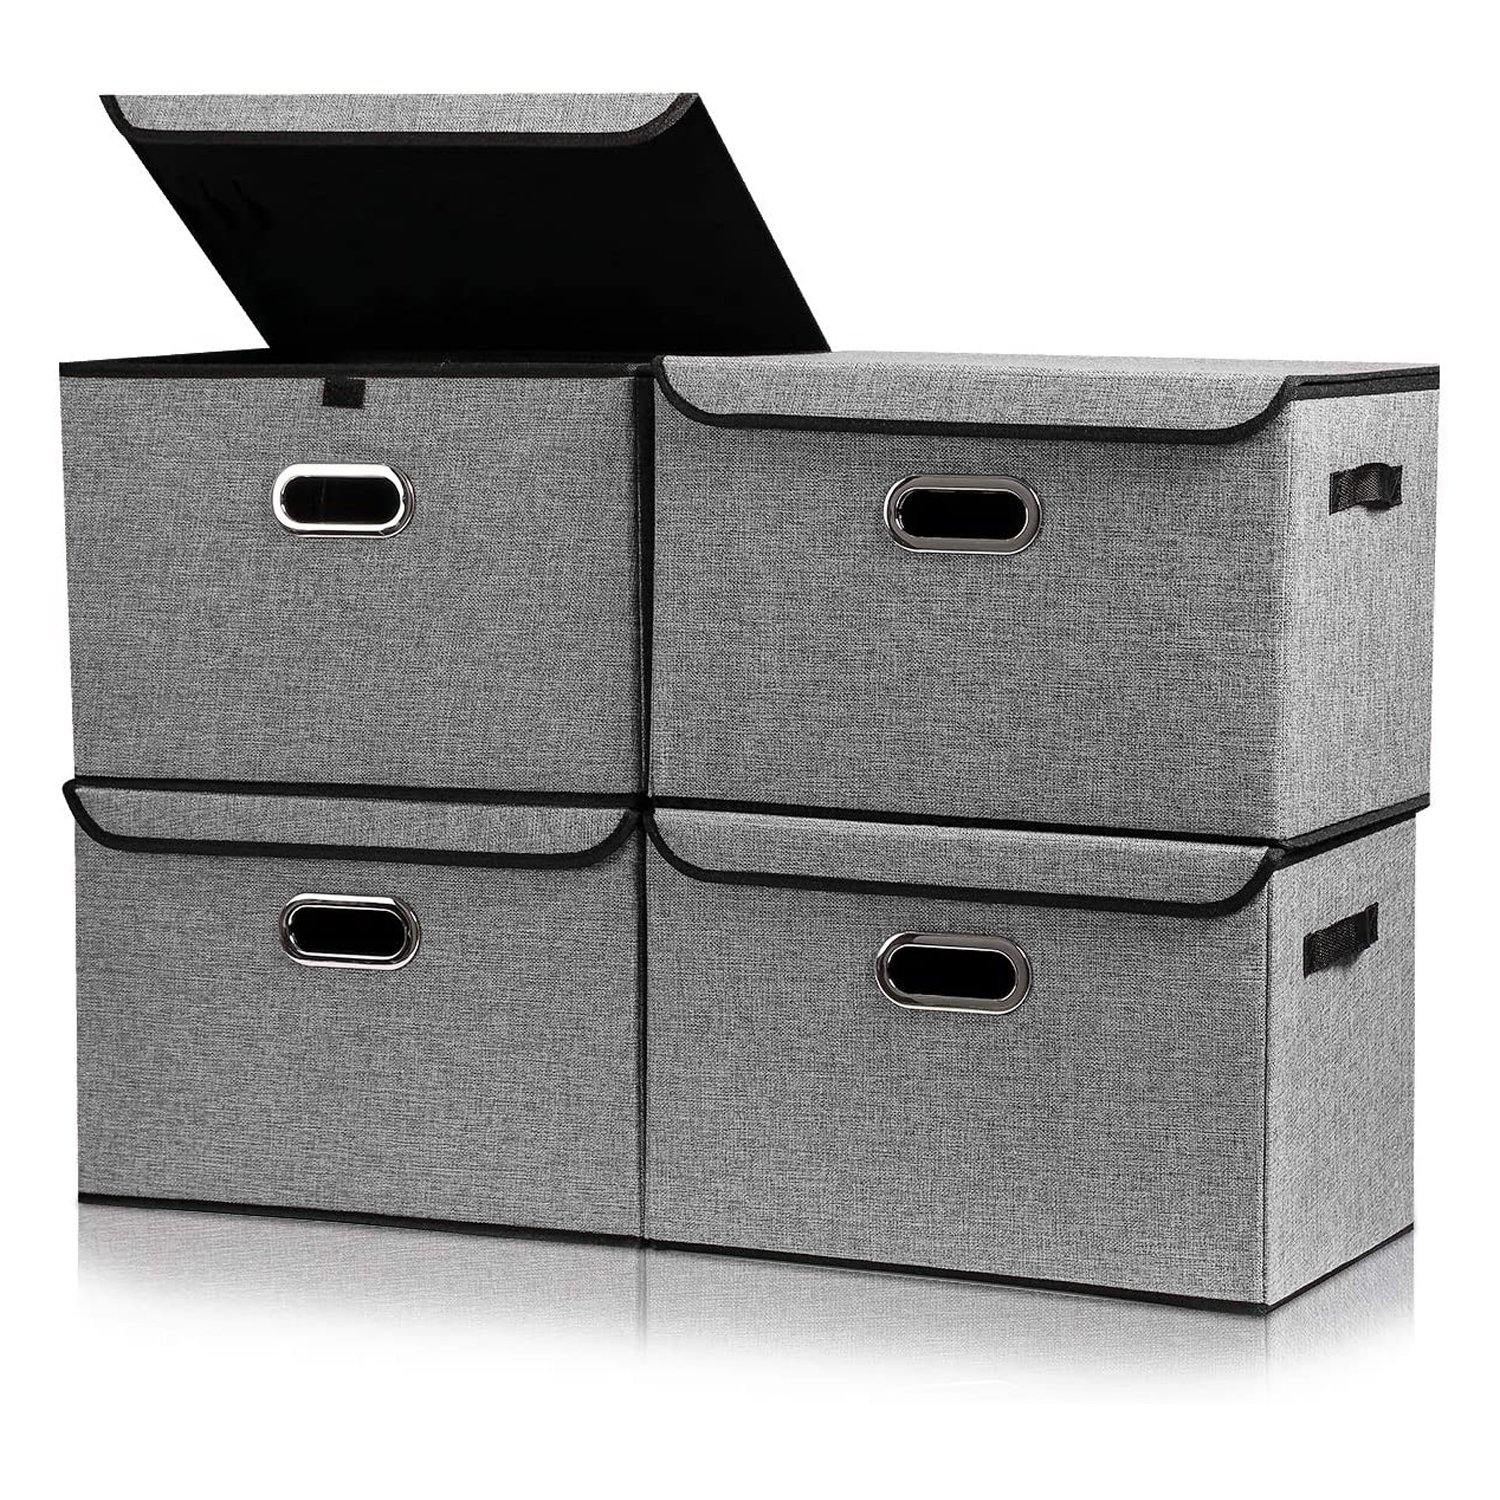 DOUBLE R BAGS Collapsible Storage Box with Lids Covers Large 4 Pack (Grey) - Double R Bags